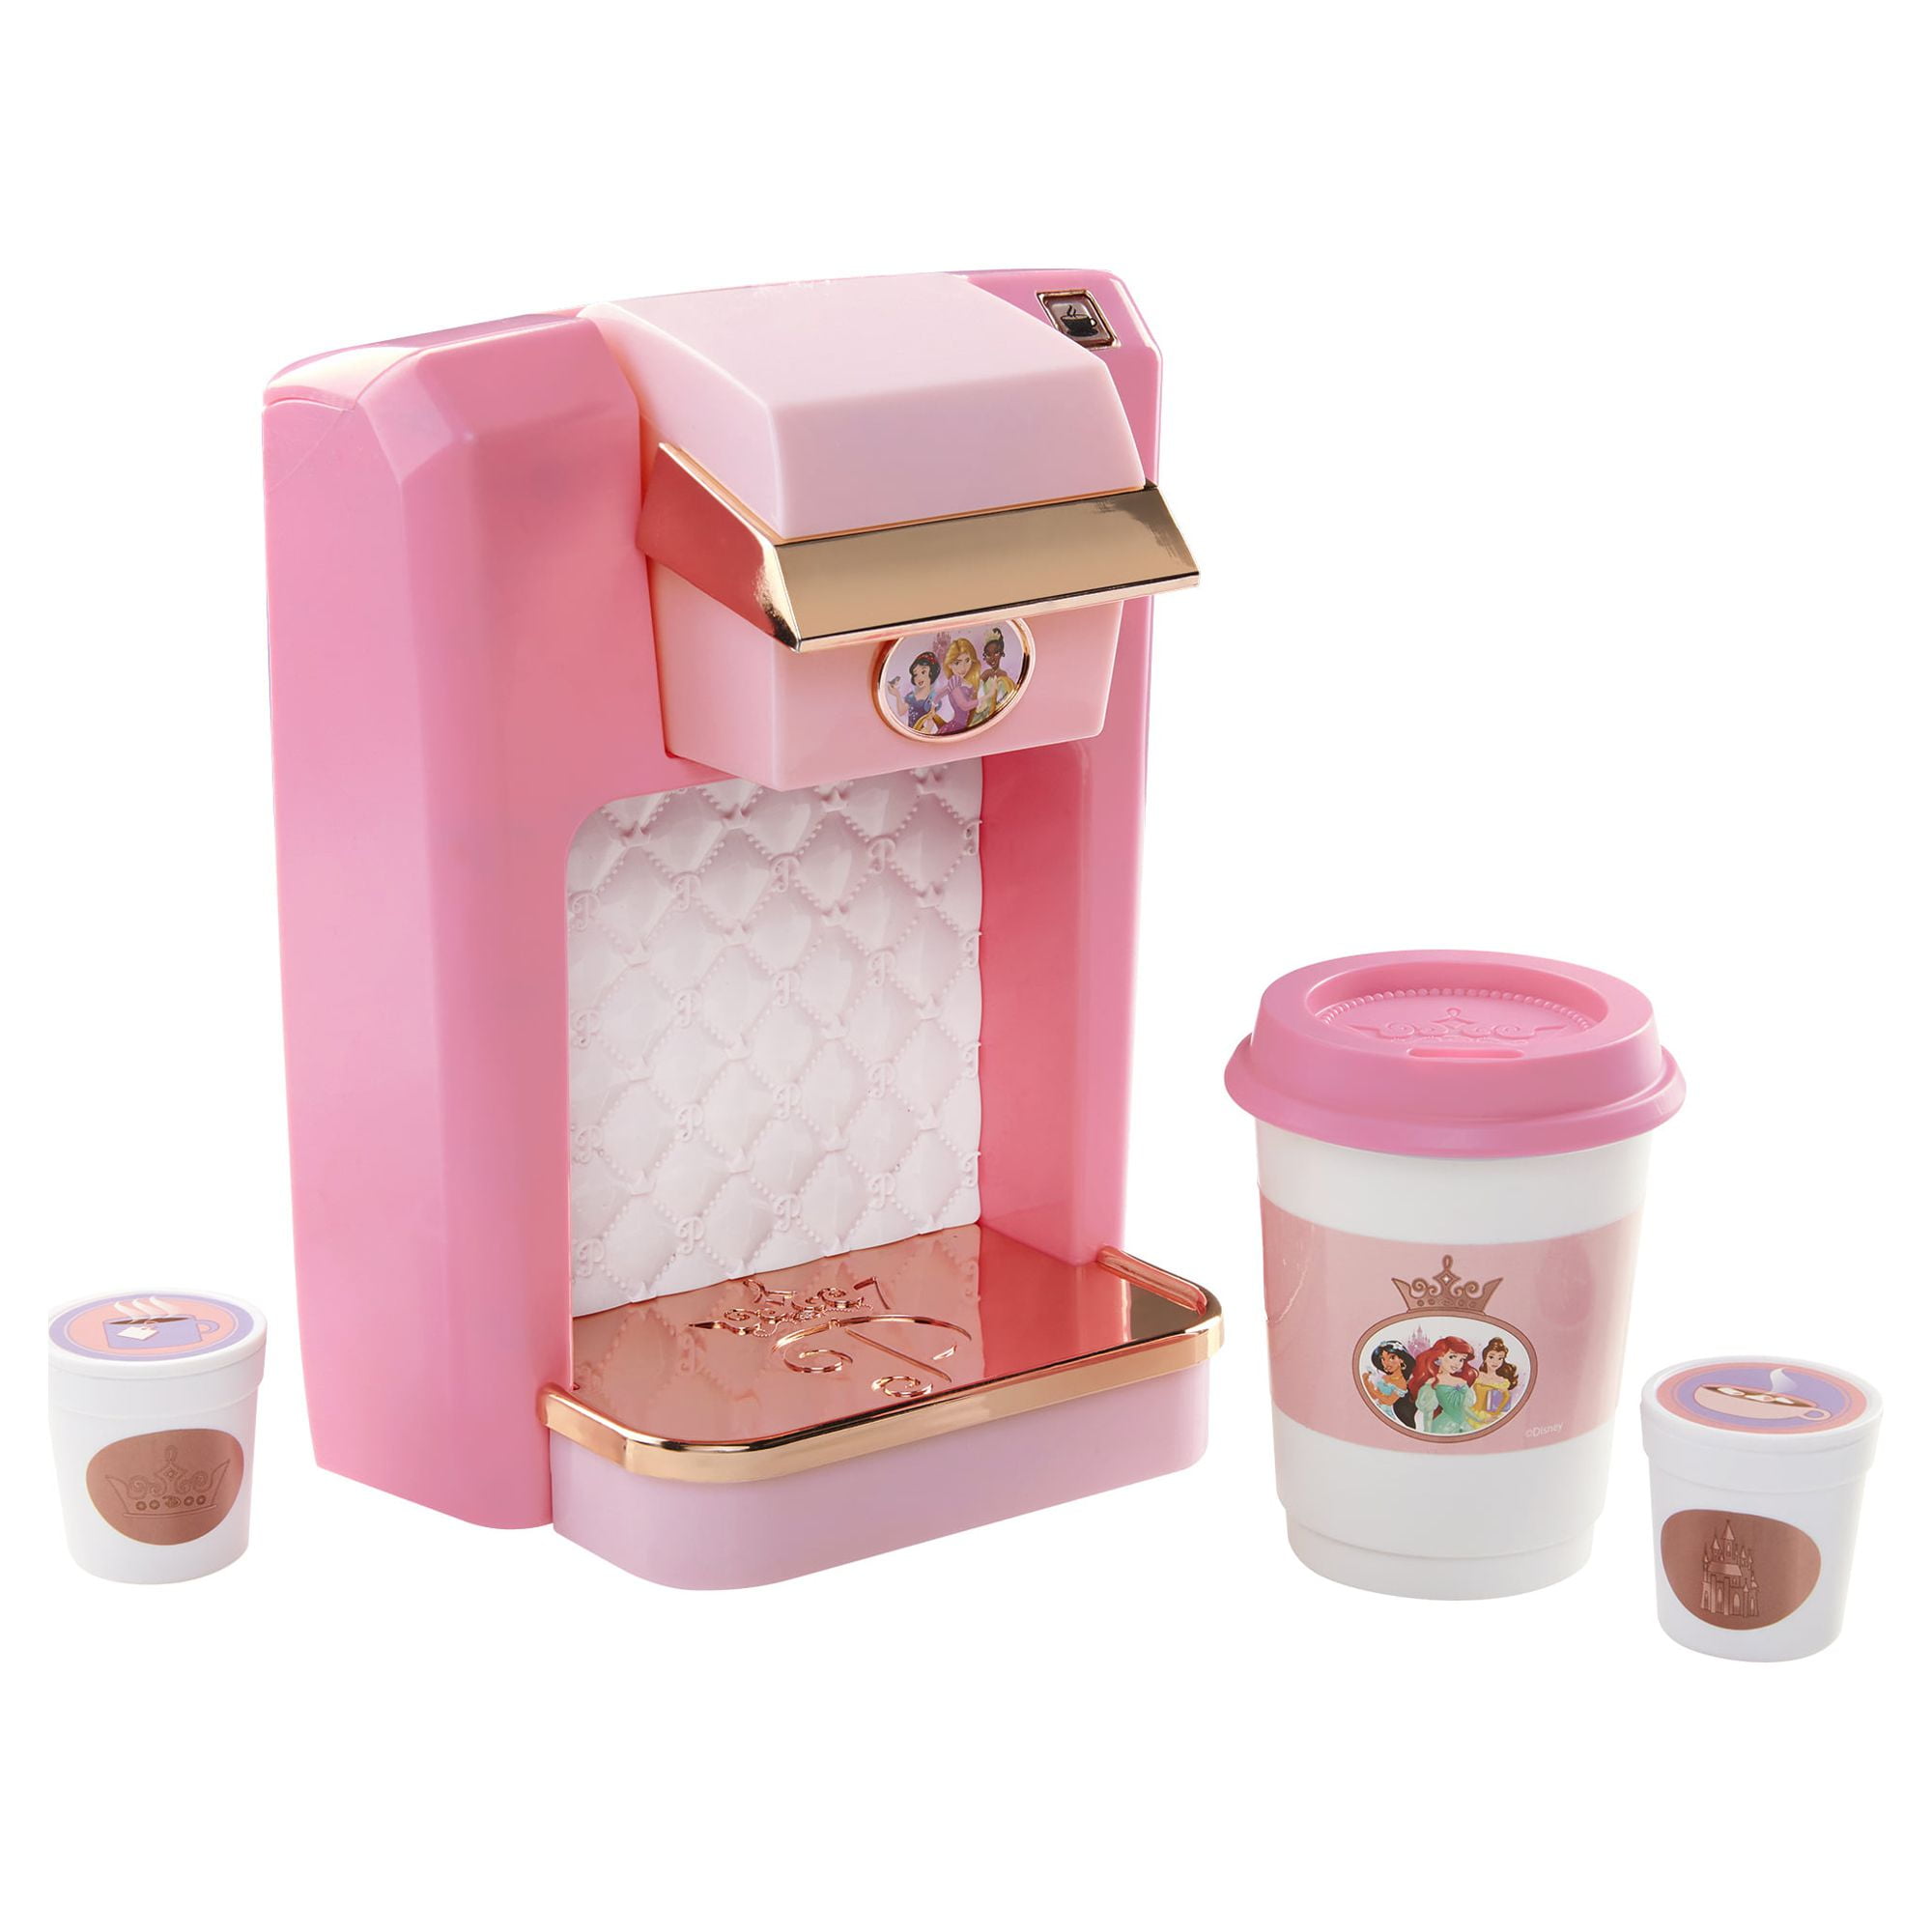 Disney Princess Style Collection Toy Espresso Machine for Kids, Coffee  Maker Play Kitchen Accessories Gift for Girls & Kids